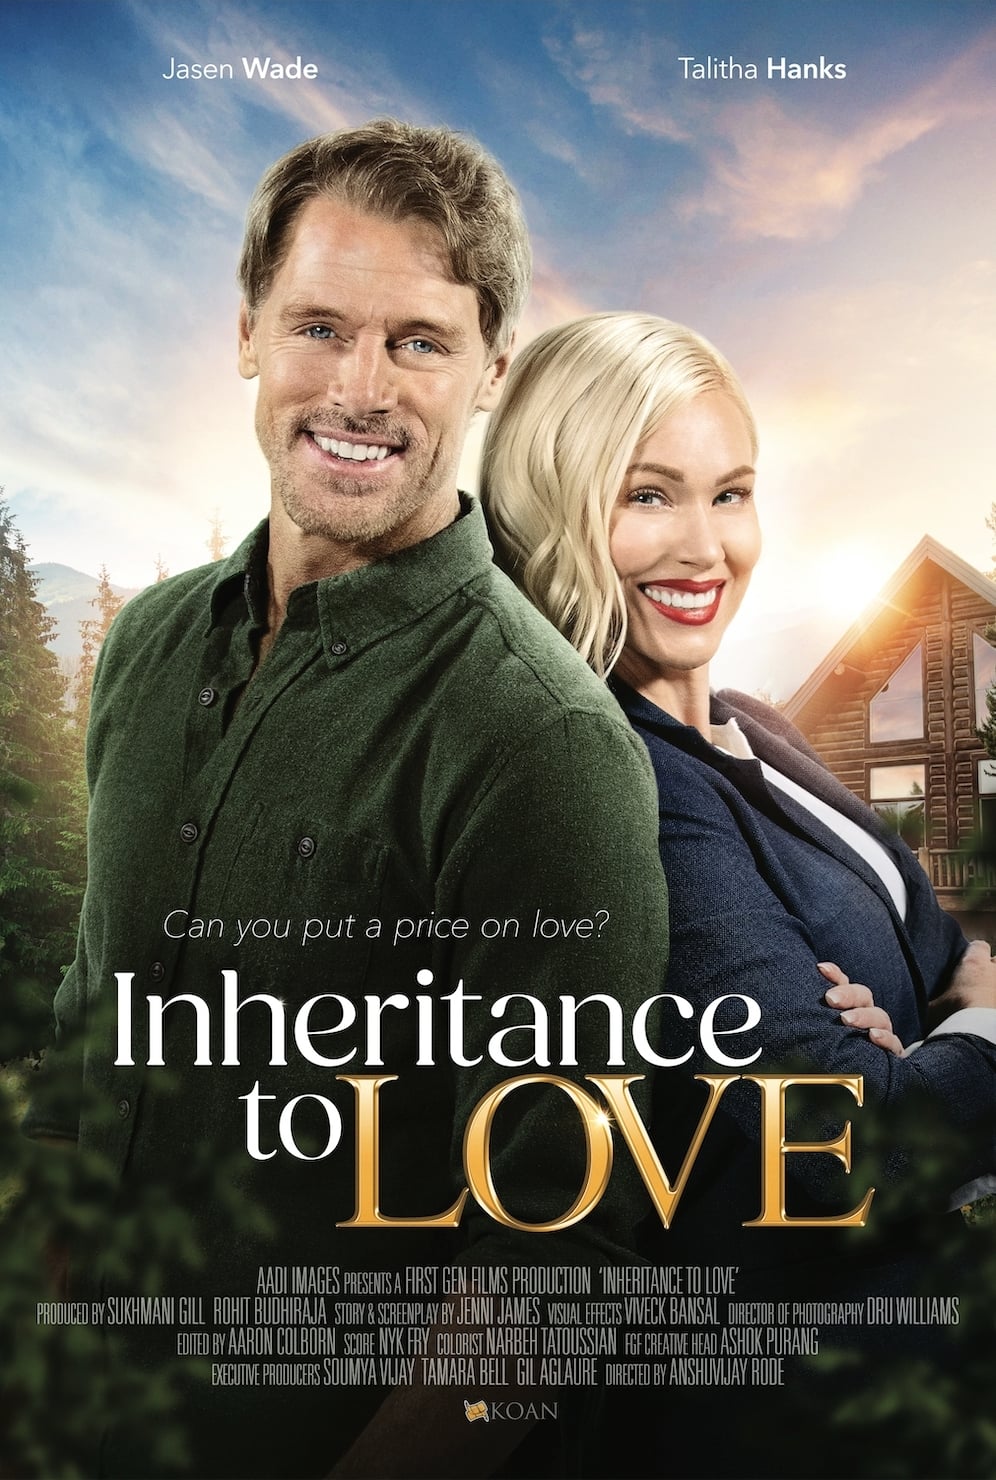 Poster for the movie "Inheritance to Love"